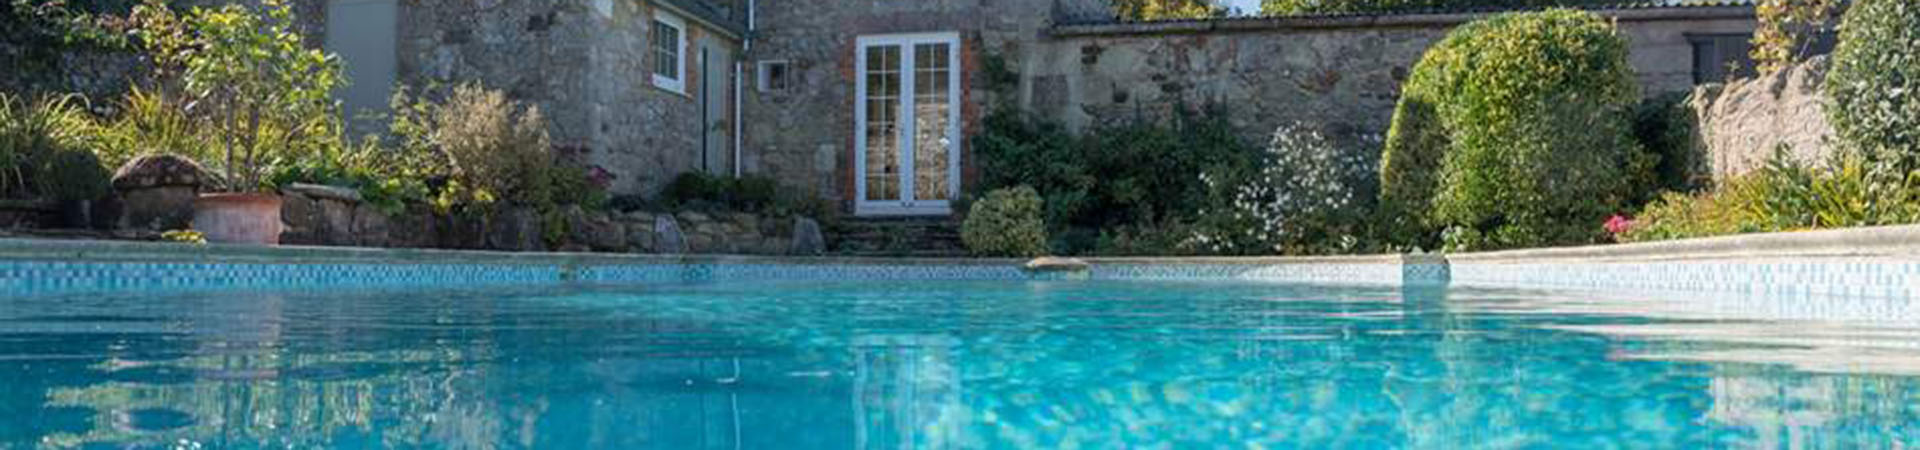 Holiday cottages with pools in South West Cornwall